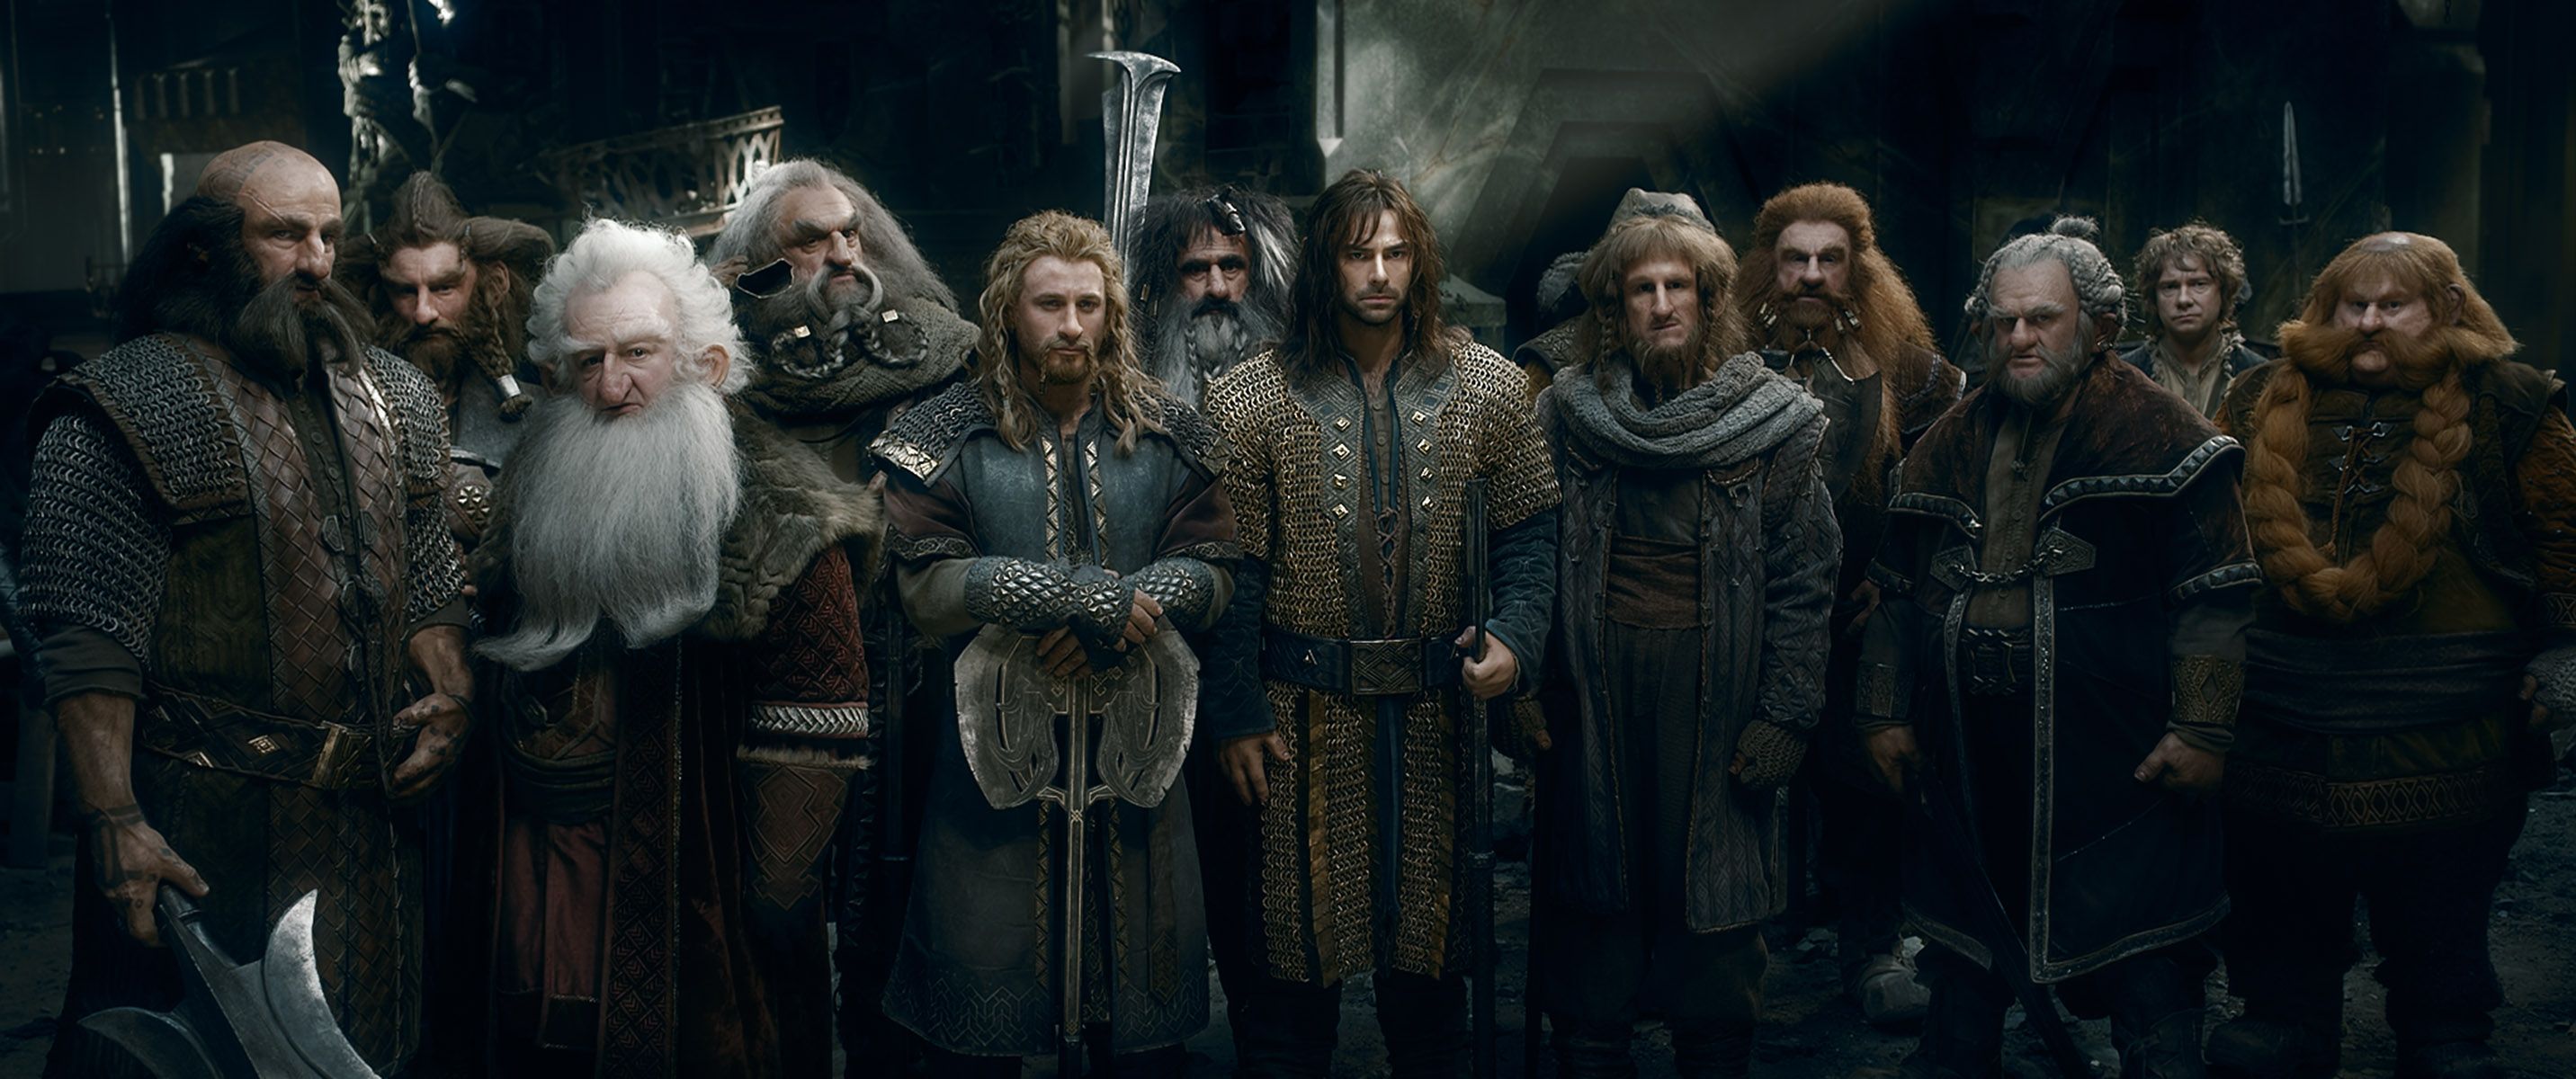 The Hobbit: The Battle of the Five Armies Photo 6